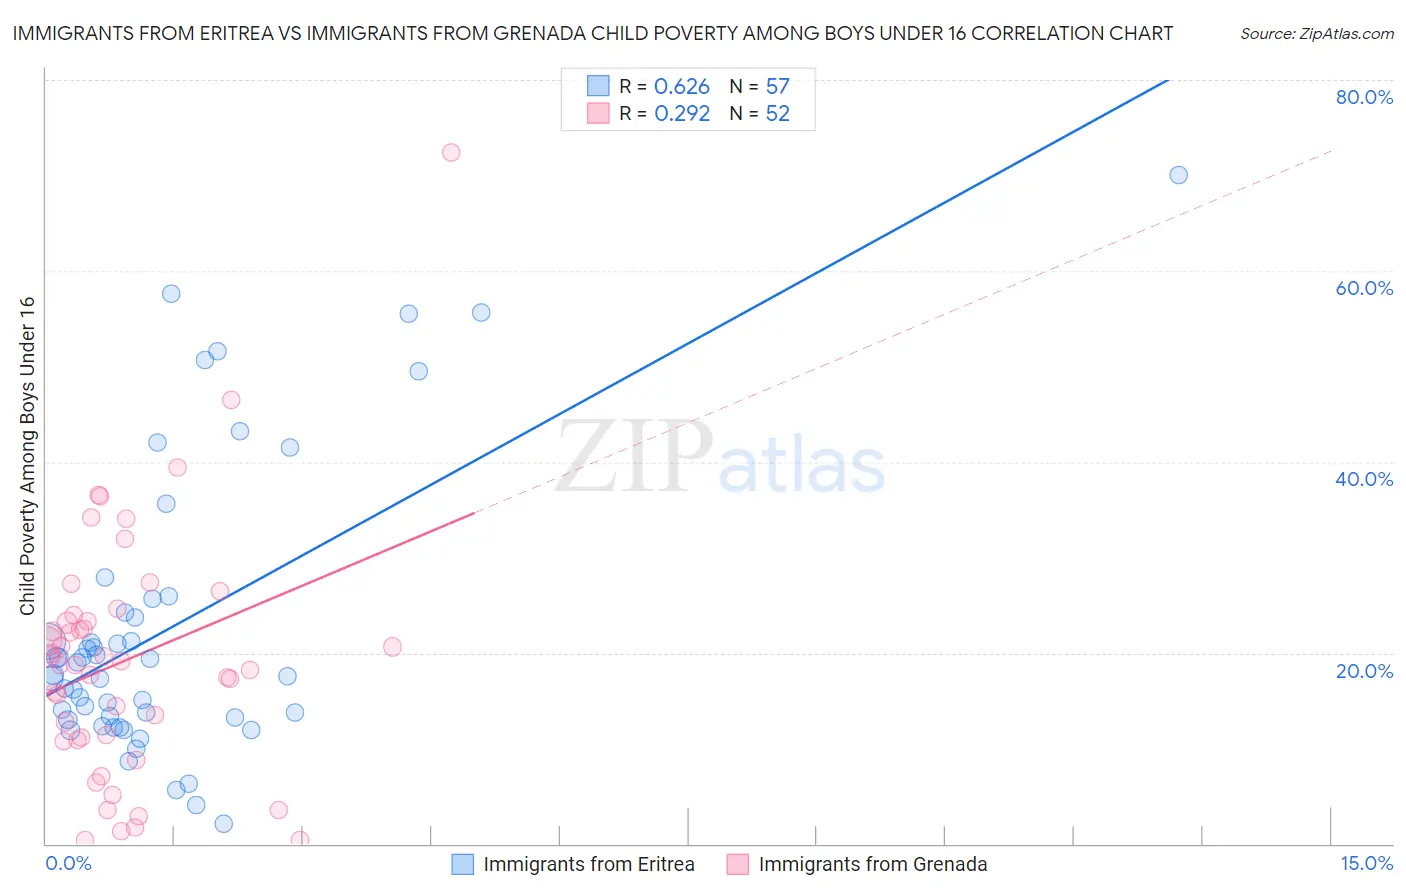 Immigrants from Eritrea vs Immigrants from Grenada Child Poverty Among Boys Under 16